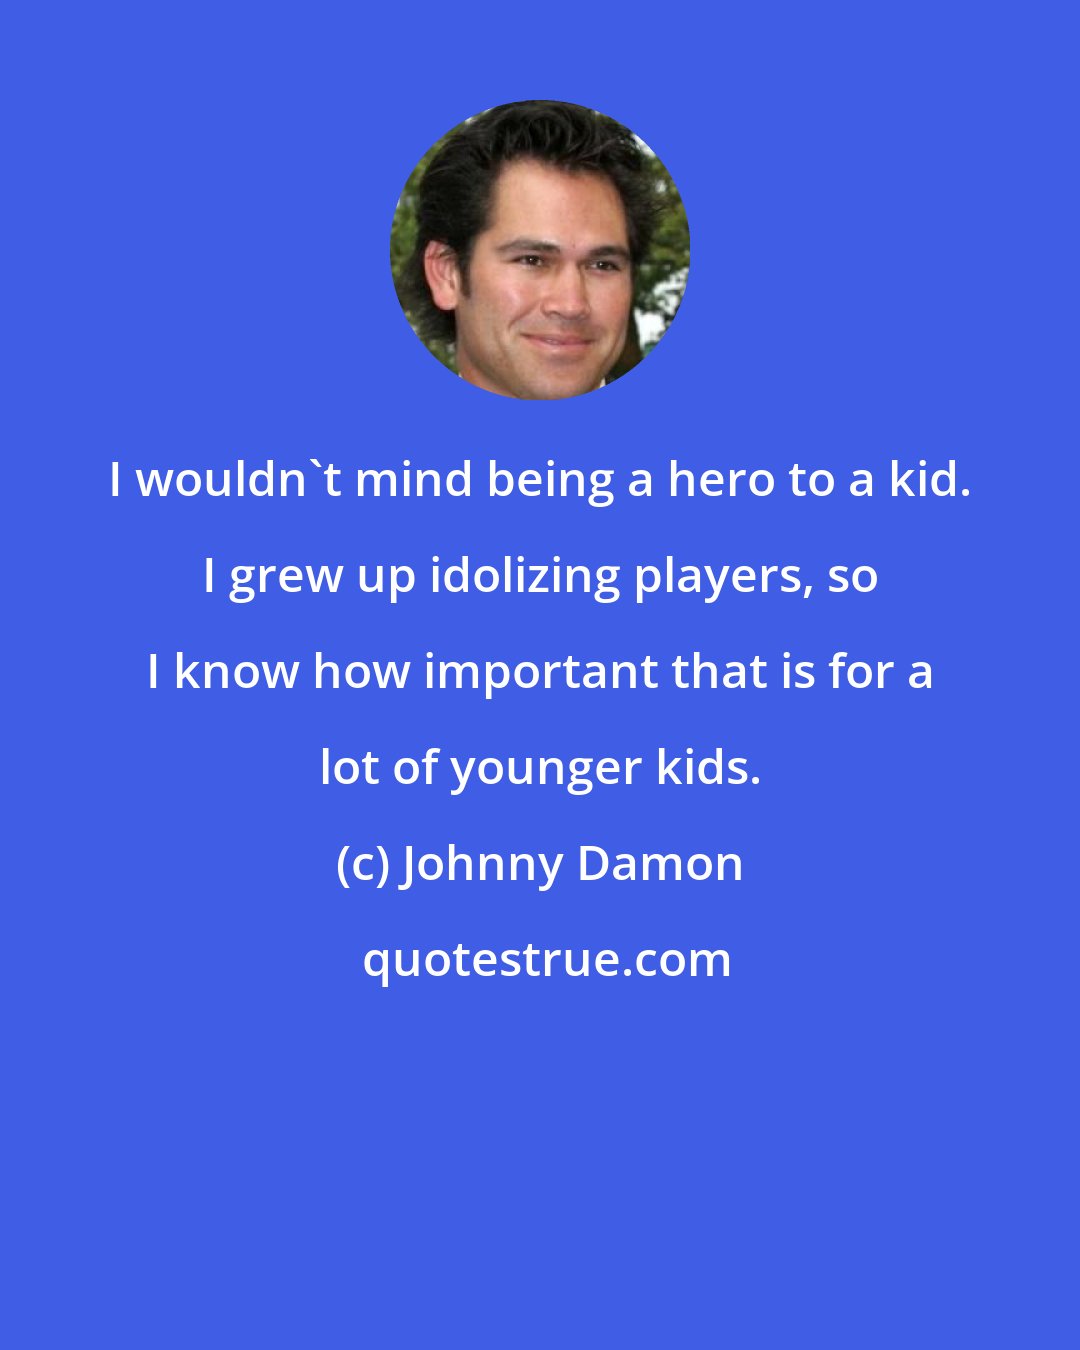 Johnny Damon: I wouldn't mind being a hero to a kid. I grew up idolizing players, so I know how important that is for a lot of younger kids.